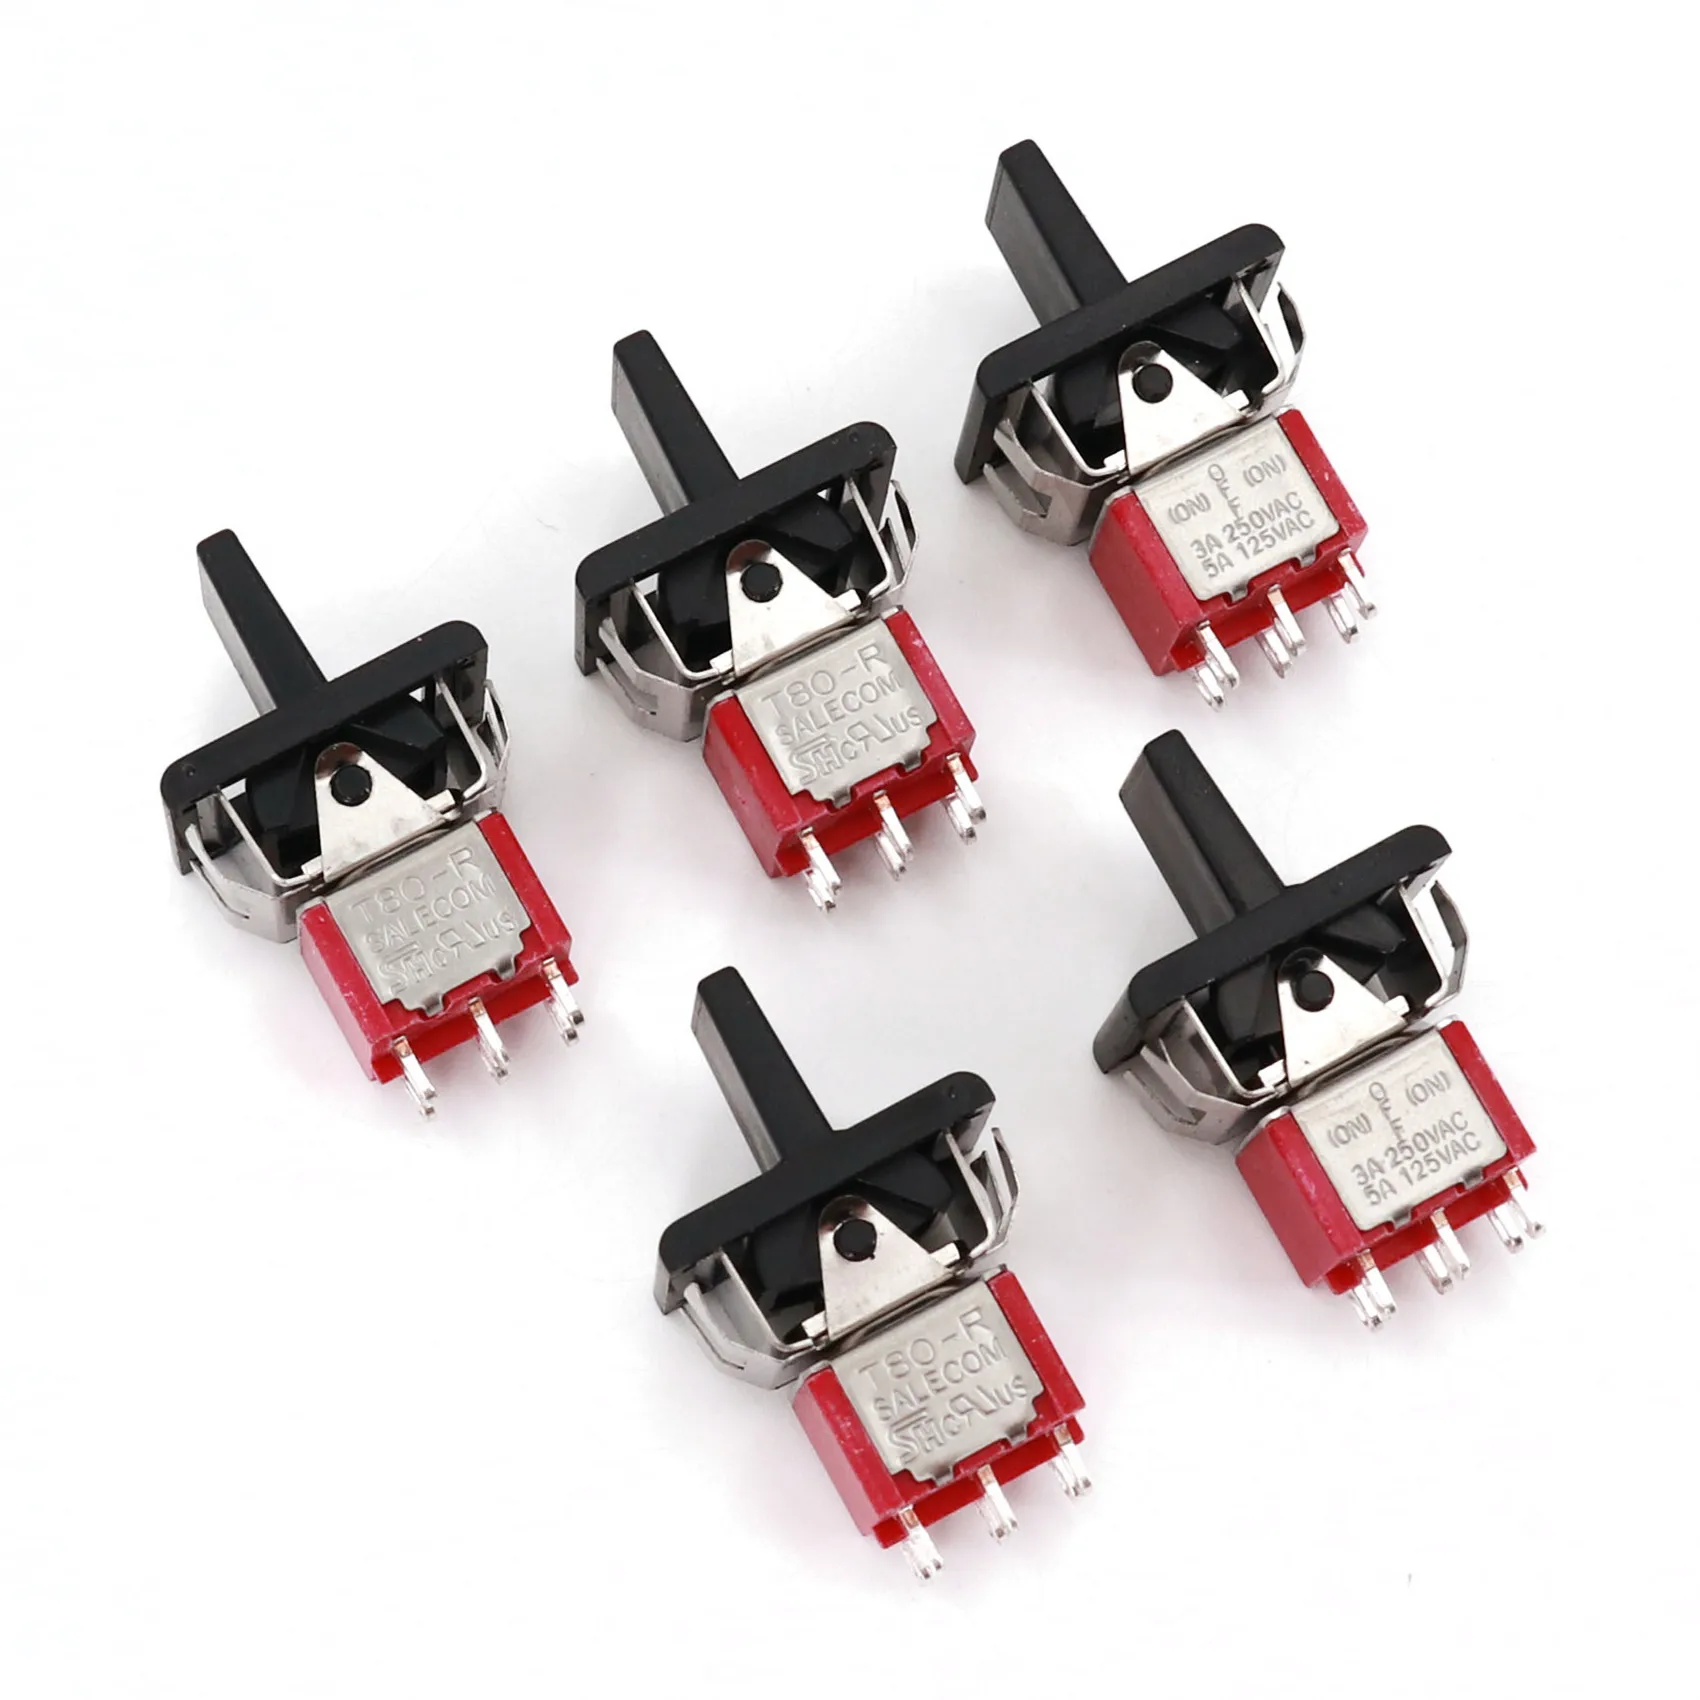 

5Pcs SH T80-R Series R8018A-P14 6Pin Momentary MOM-OFF-MOM Self-Return DPDT Mini Rocker and Paddle Switch